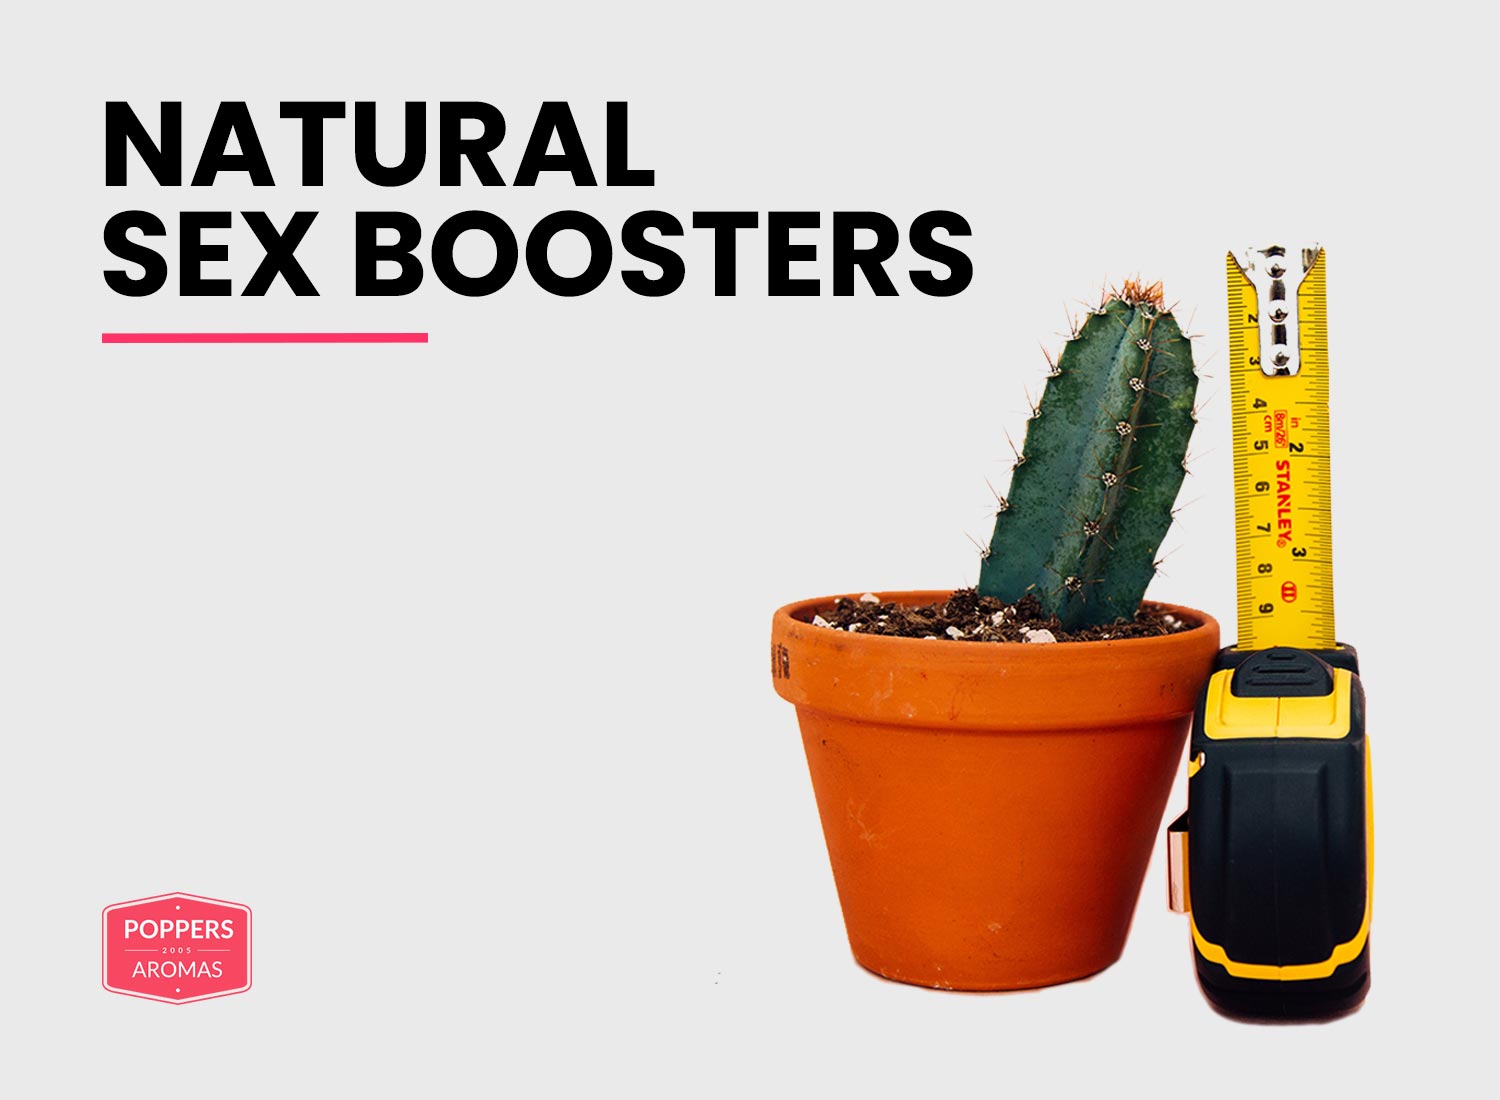 You are currently viewing 4 natural sexual boosters for men.